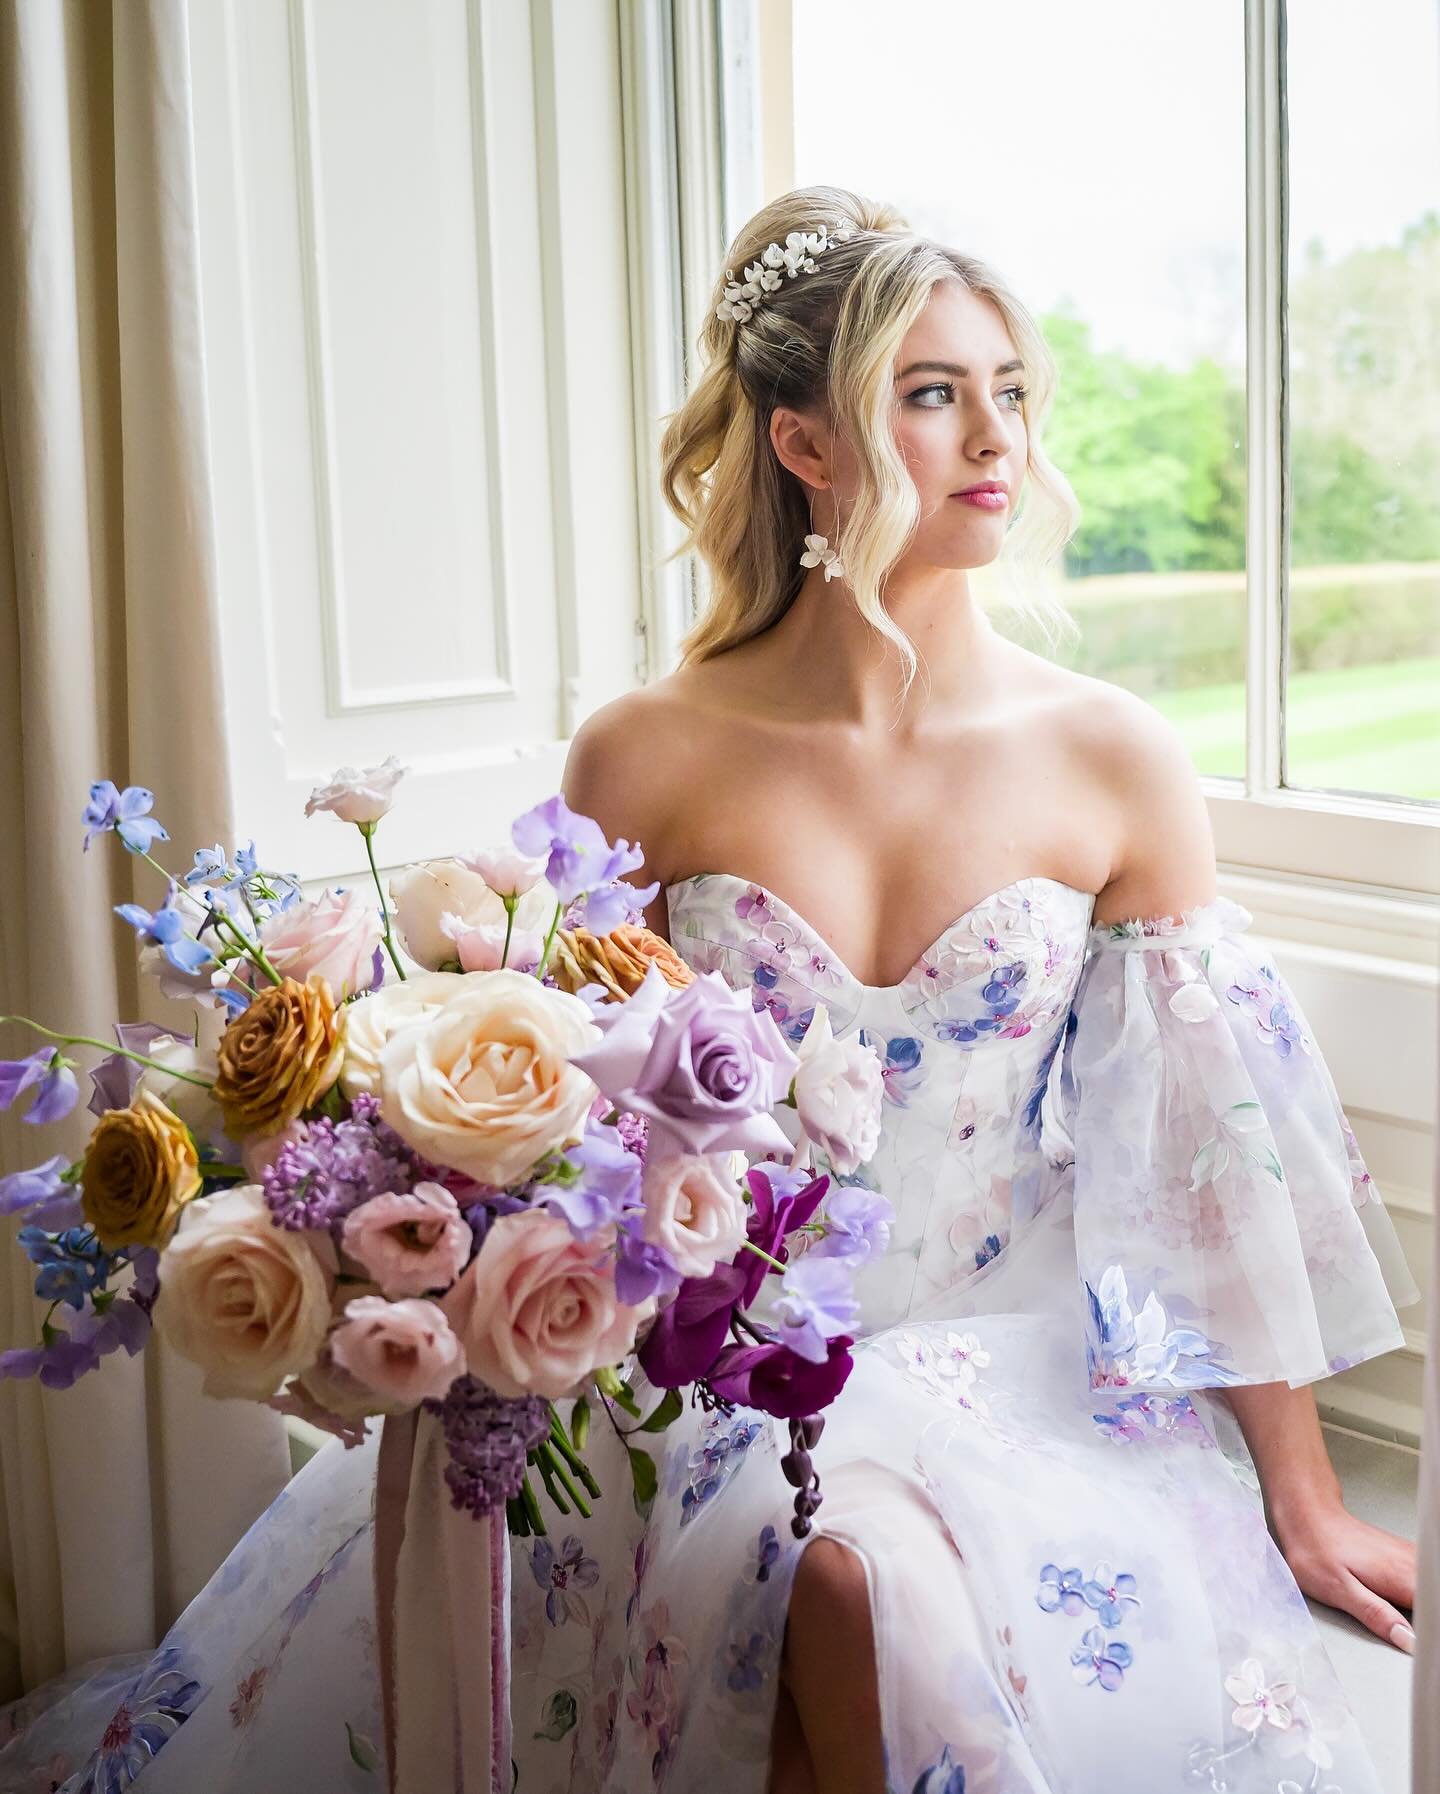 B L O O M 🌸

The photos from Wednesday&rsquo;s shoot are officially in and OMG, we are blown away. 

The overall brief of this shoot was to give all suppliers involved &lsquo;free creative reign&rsquo;, coherent to the dress styles chosen for the da